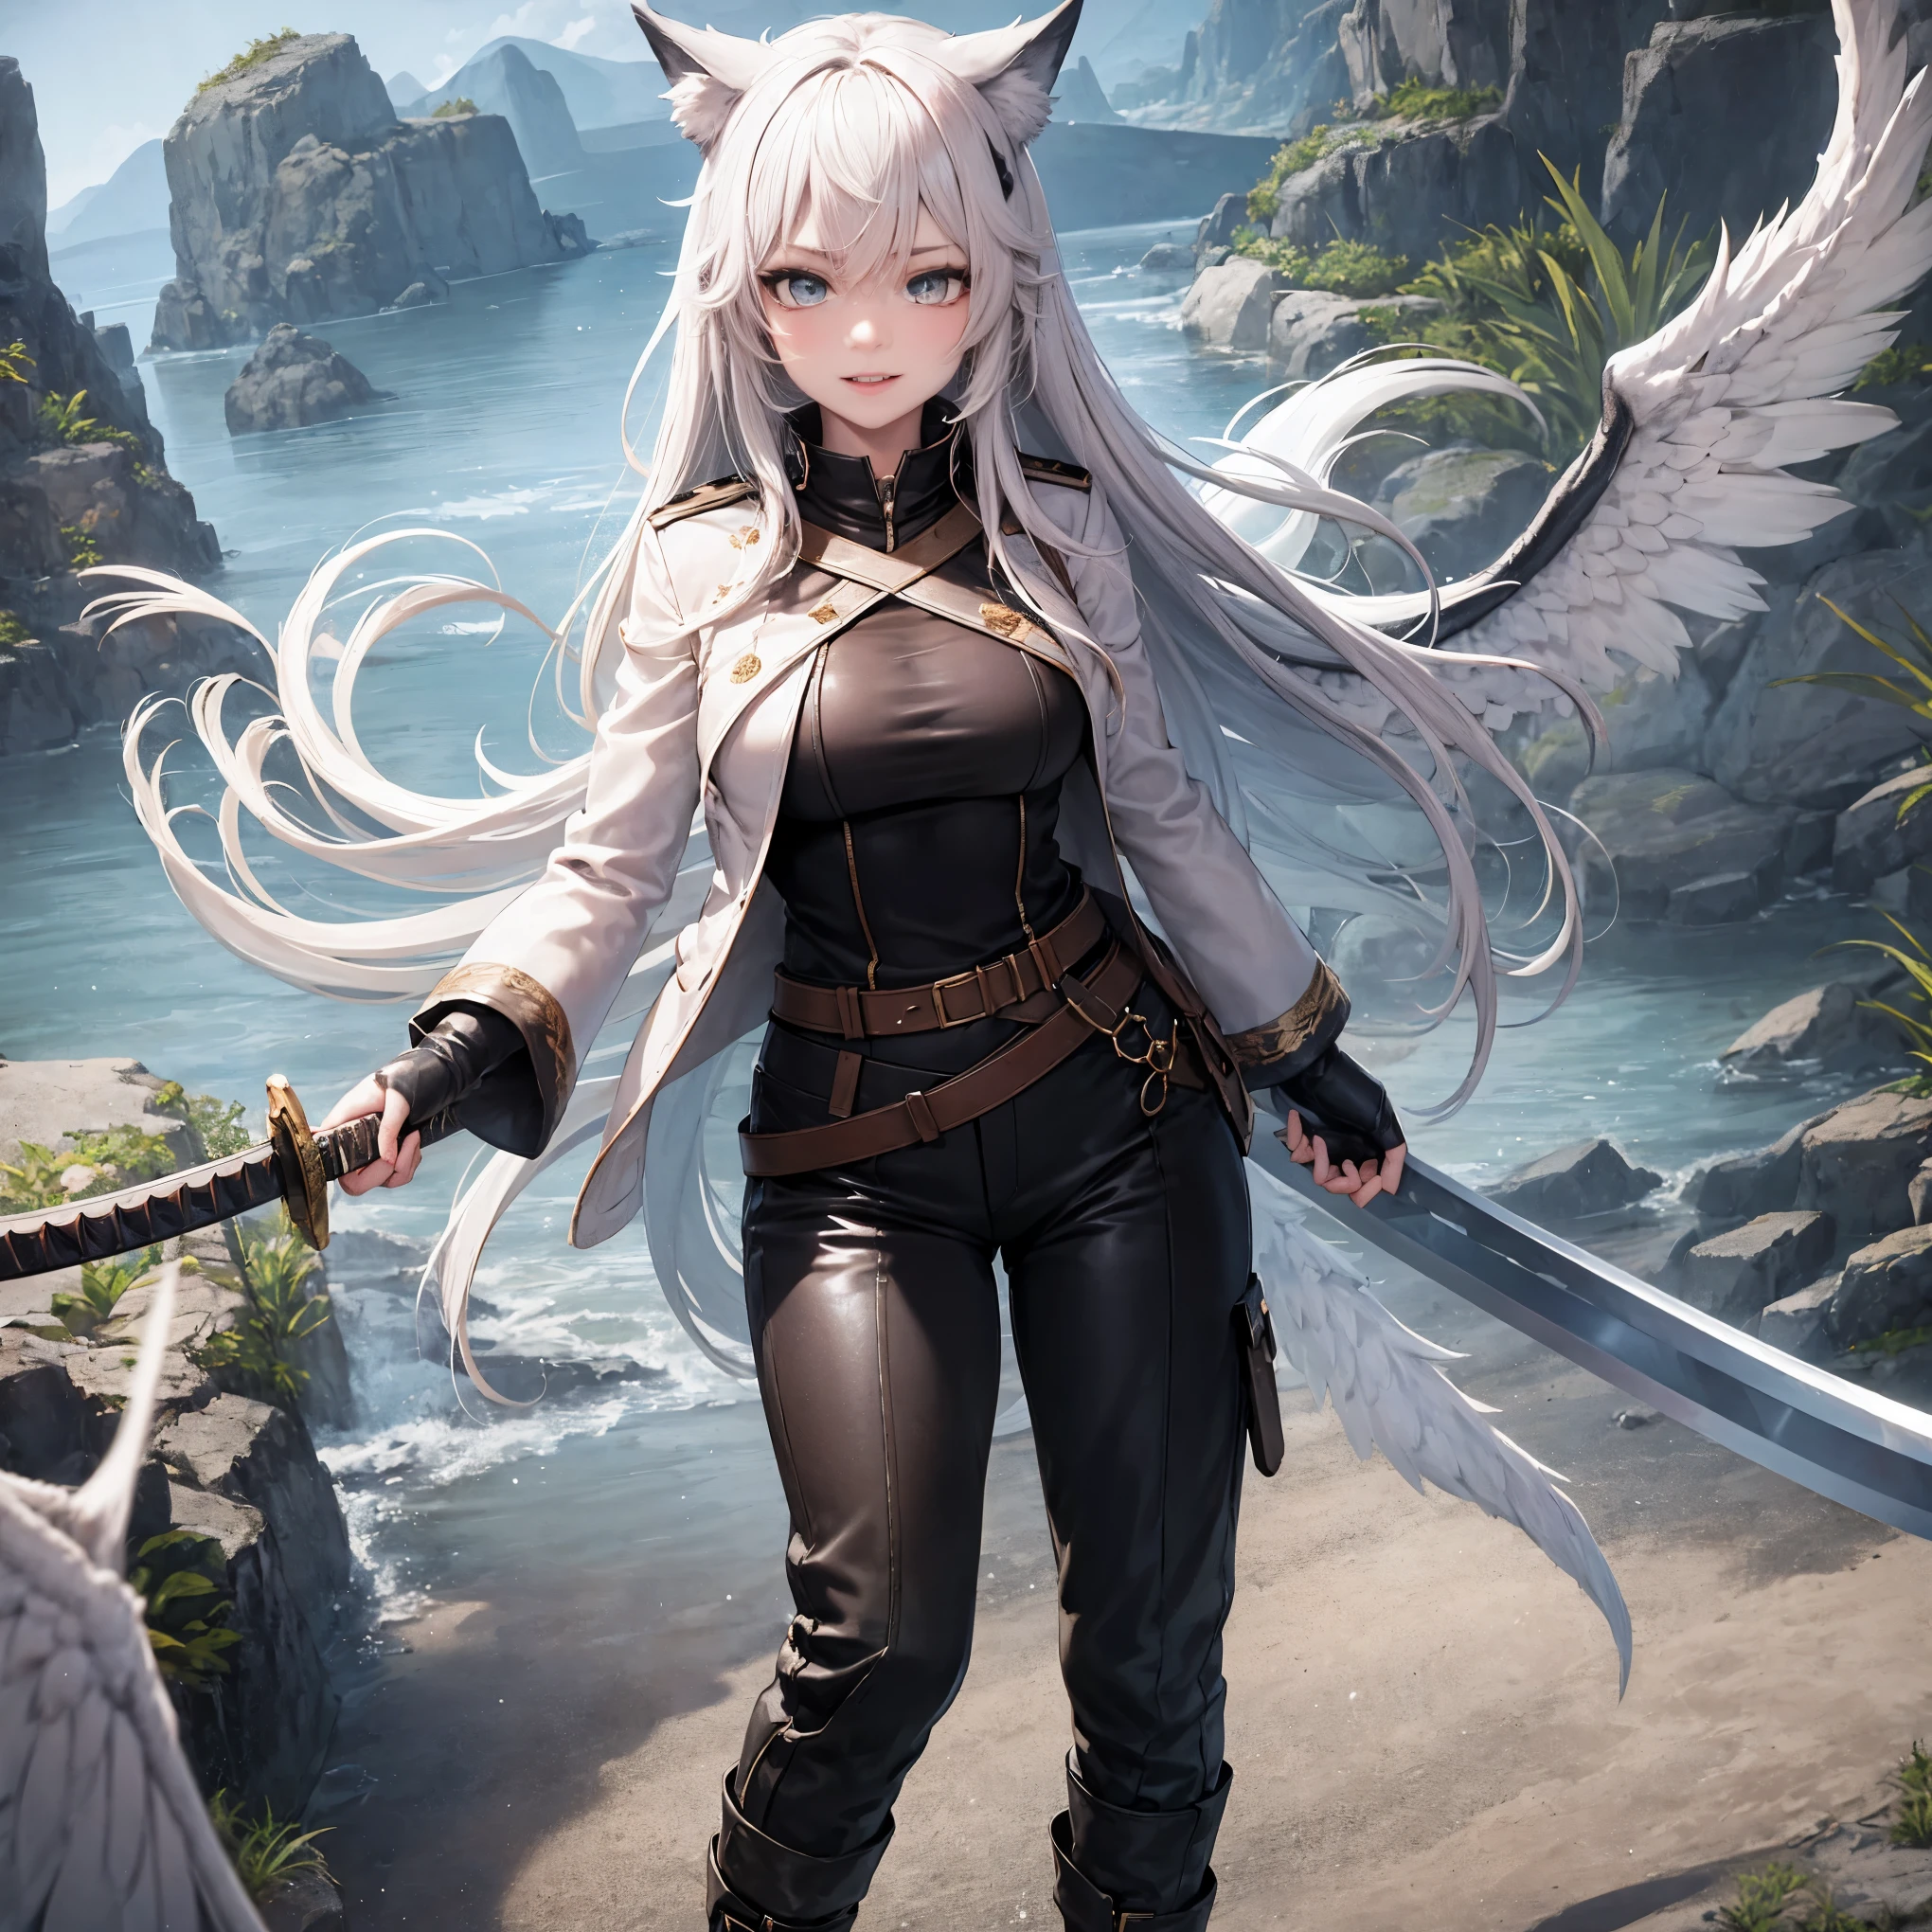 masterpiece, 8k resolution, high quality, high resolution, best quality, extremally detailed, best resolution, absurd resolution, ray tracing, high detailed, masterpiece, extremely detailed,detailed angelic face, shoulder length white hair, female, 2 white fox ears, teenage girl, slime body, white scale dragon tail, military boots,black leggings, military combat pants, black T-shirt, white jacket open, medium size chest, detailed blue eyes,solo female,1 dragon tail, tomboyish, thick dragon tail, white scales, 2 dragon wings, white fluffy dragon wings, detailed face, holding a katana sword,very detailed, amazing details,solo female, 1 female, detailed white furry dragon wings